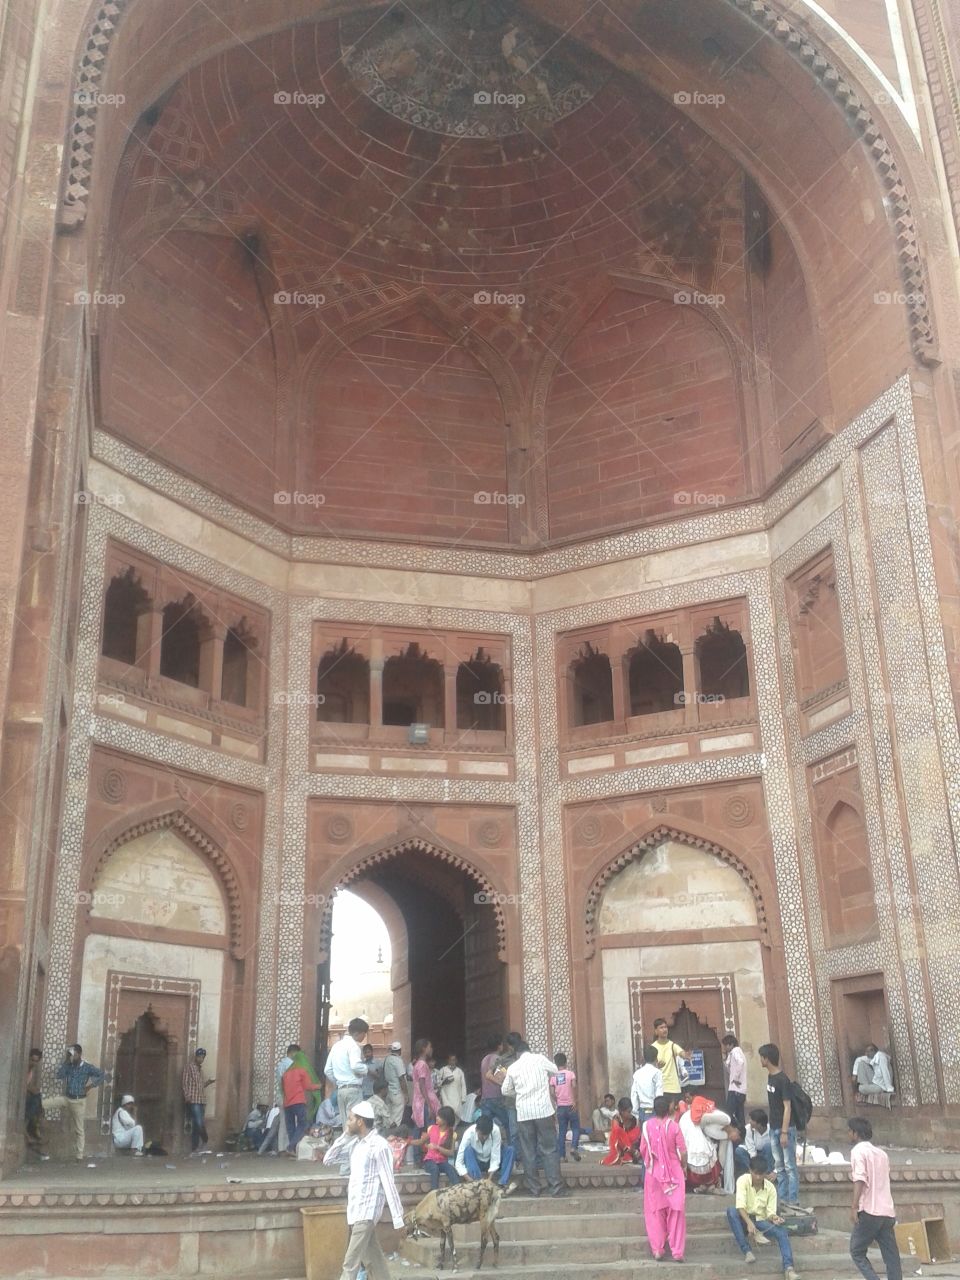 this is Buland Darwaza is stay in Fatehpur Sikri, Agra, Uttar Pradesh, India. its tourist place and very famous place.